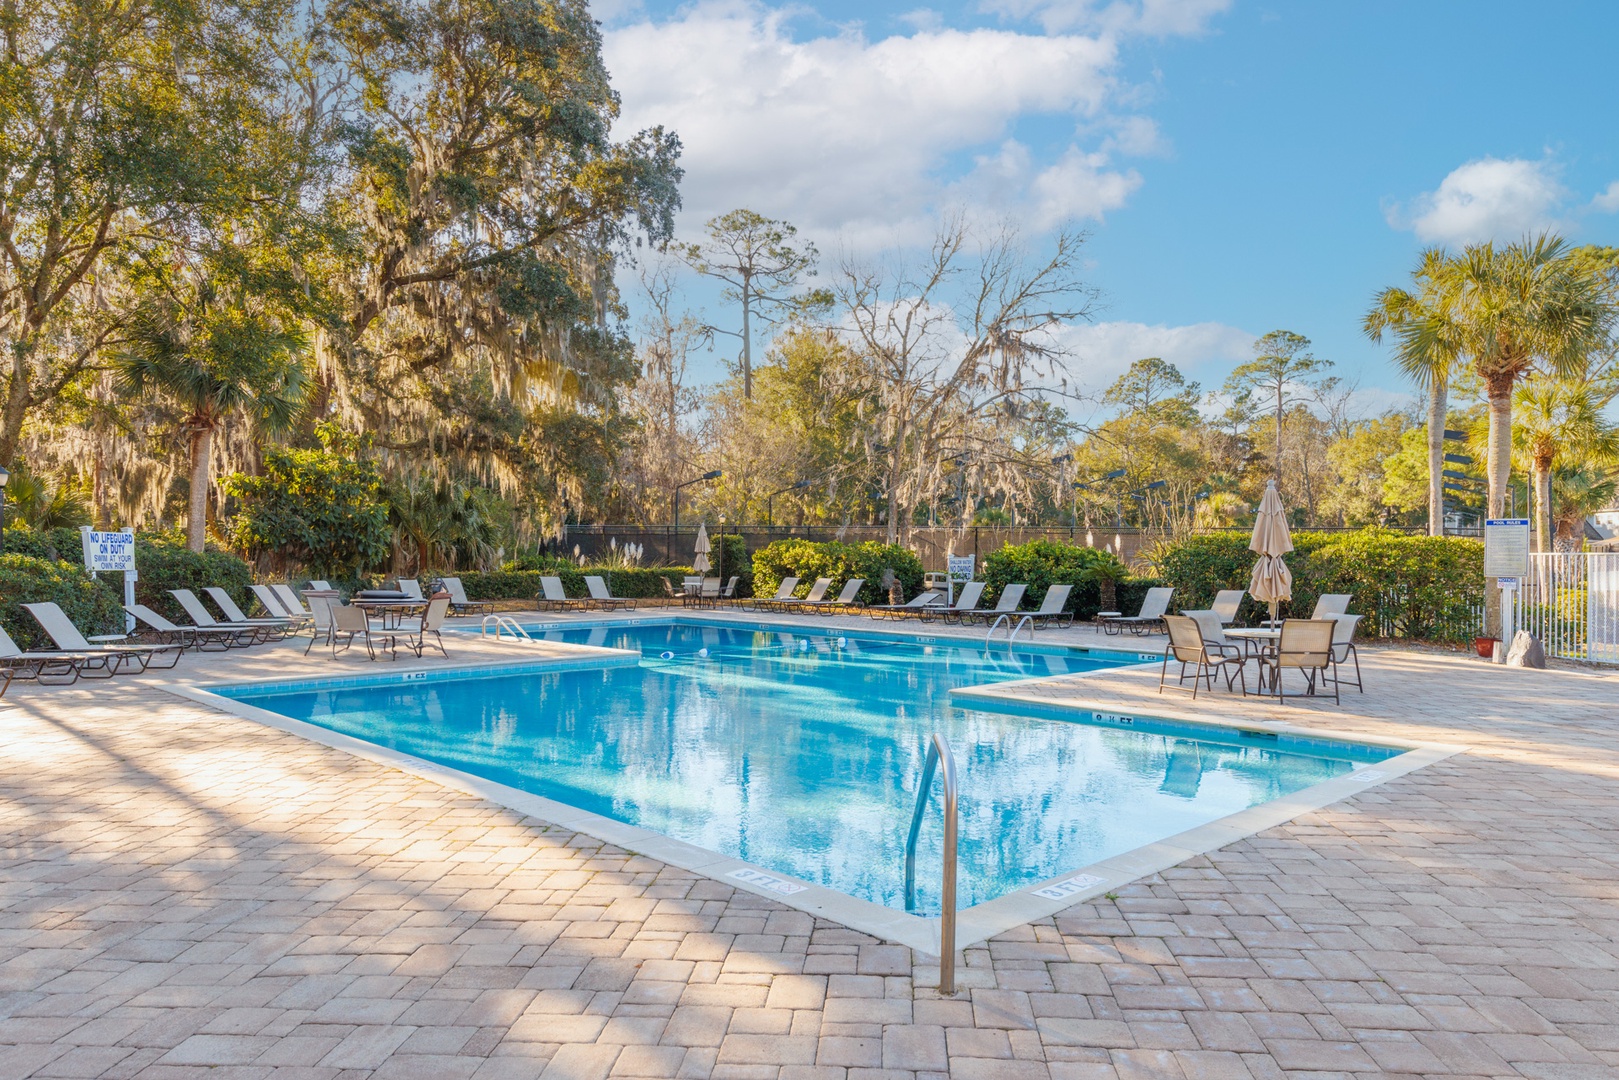 Retreat to the communal pool for an afternoon of relaxation